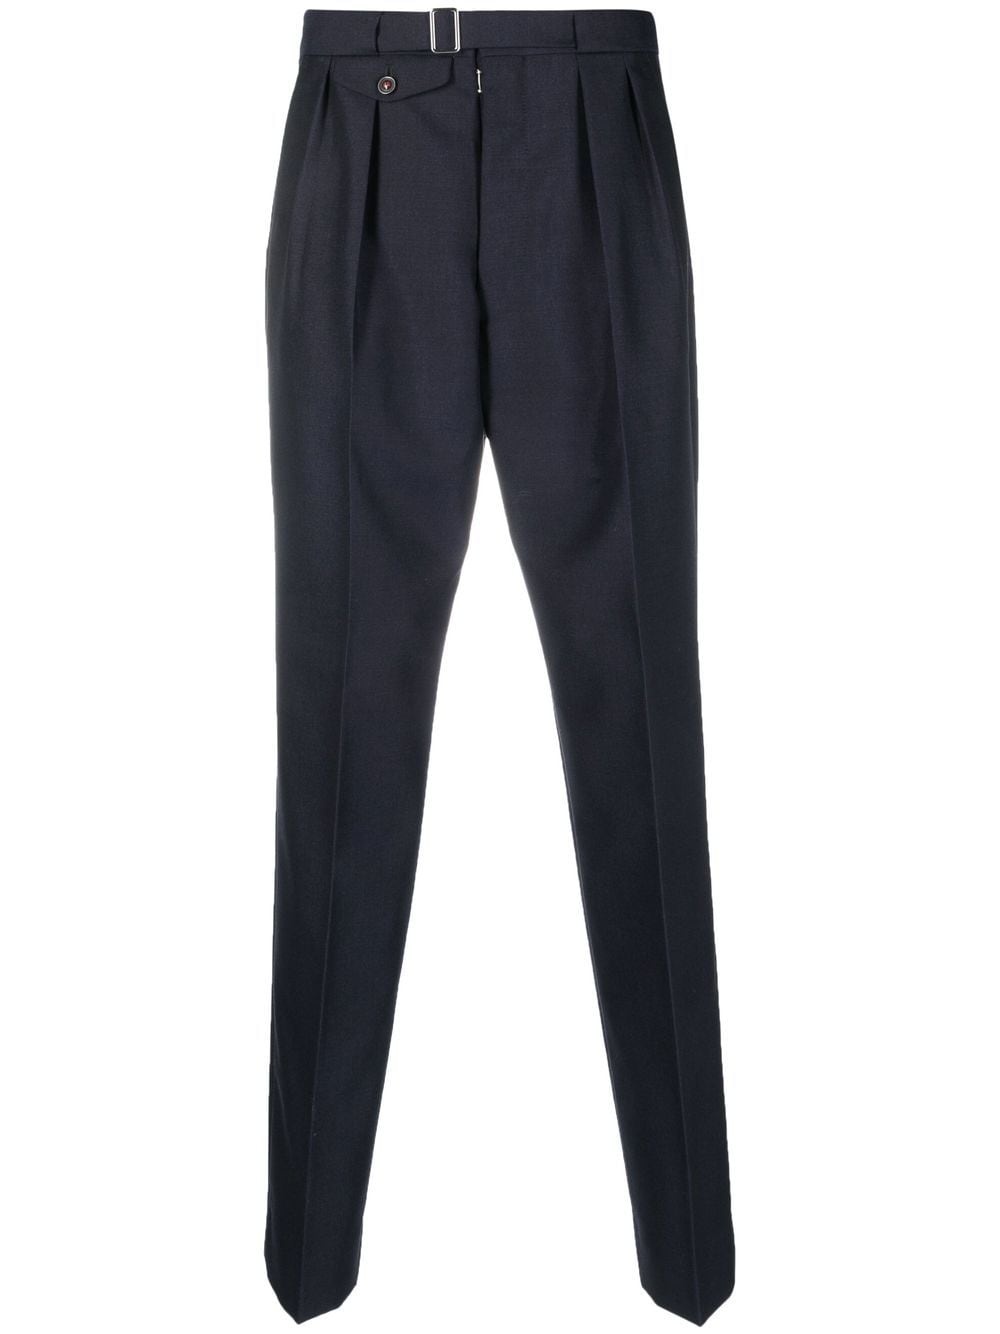 four-stitch tapered trousers - 1